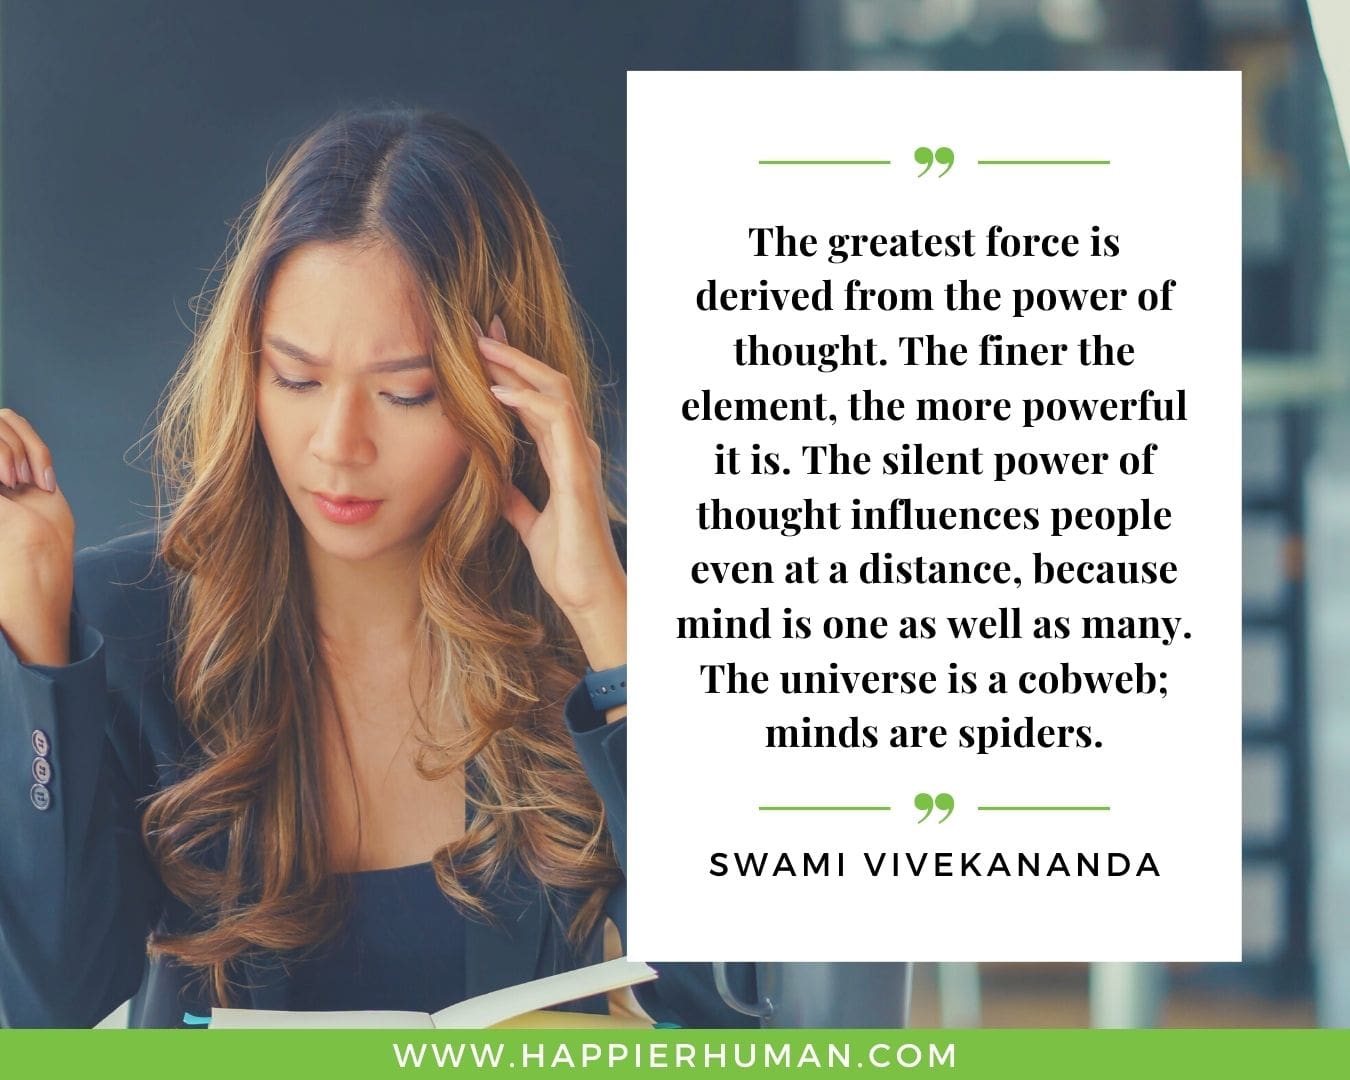 Overthinking Quotes - "The greatest force is derived from the power of thought. The finer the element, the more powerful it is. The silent power of thought influences people even at a distance, because mind is one as well as many. The universe is a cobweb; minds are spiders." - Swami Vivekananda